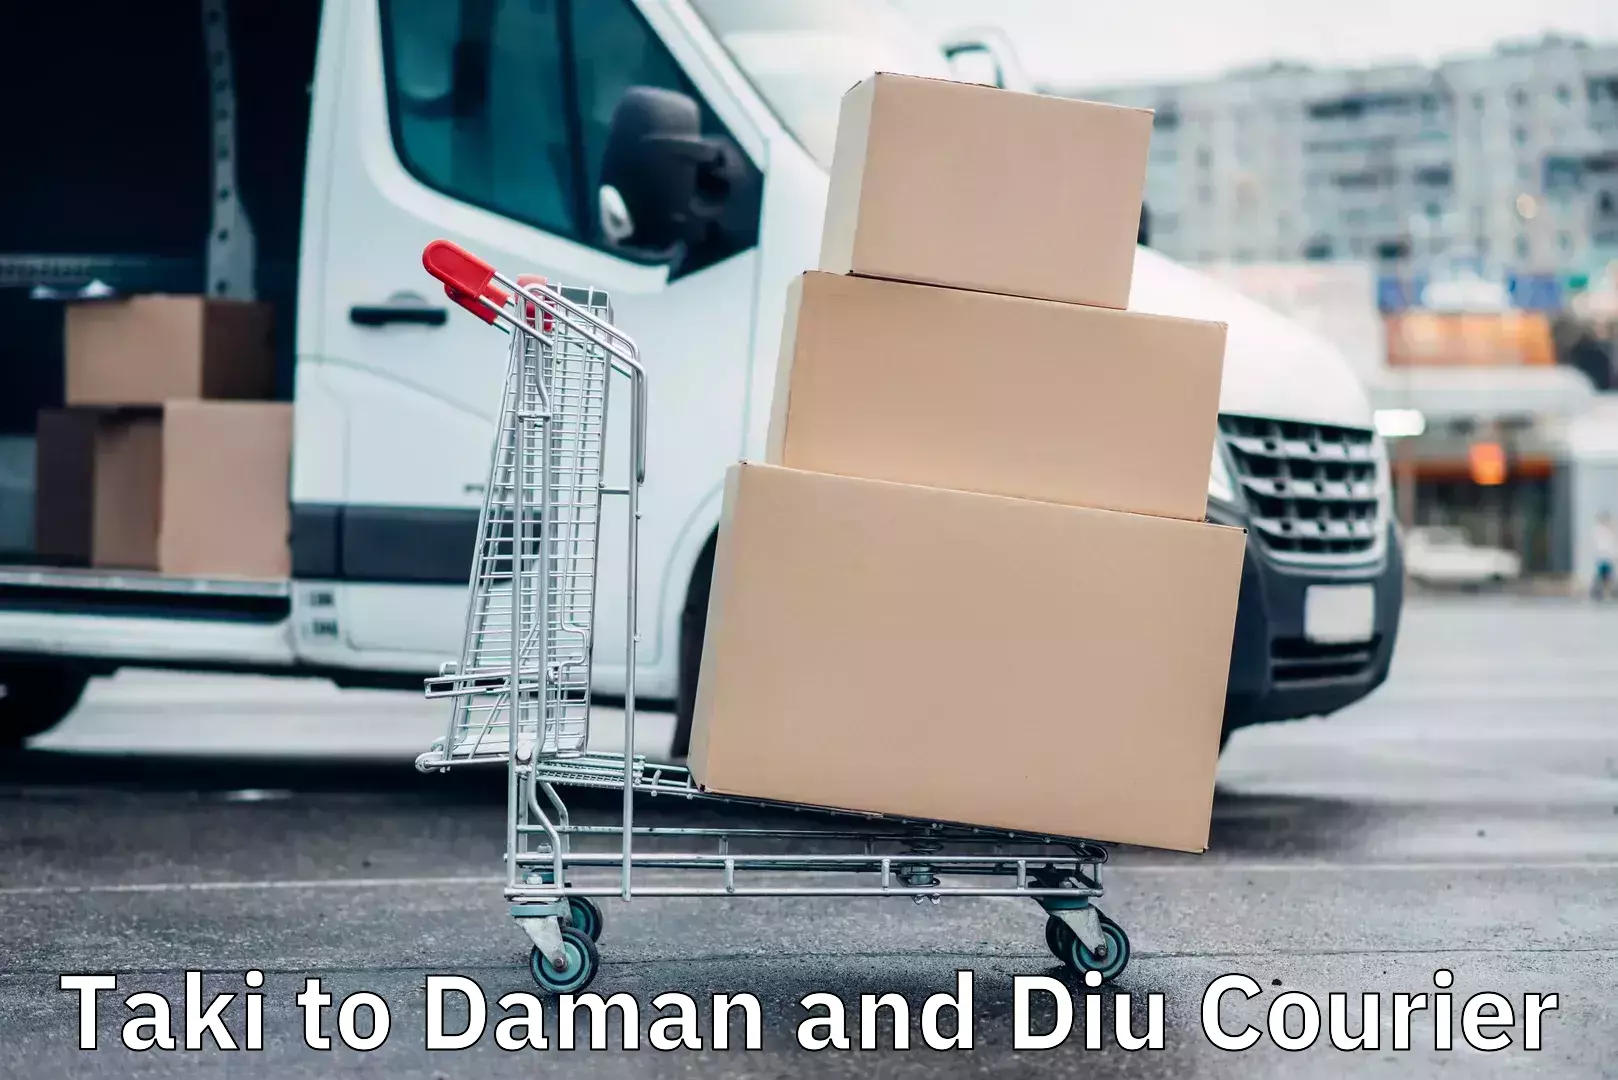 Advanced tracking systems Taki to Daman and Diu